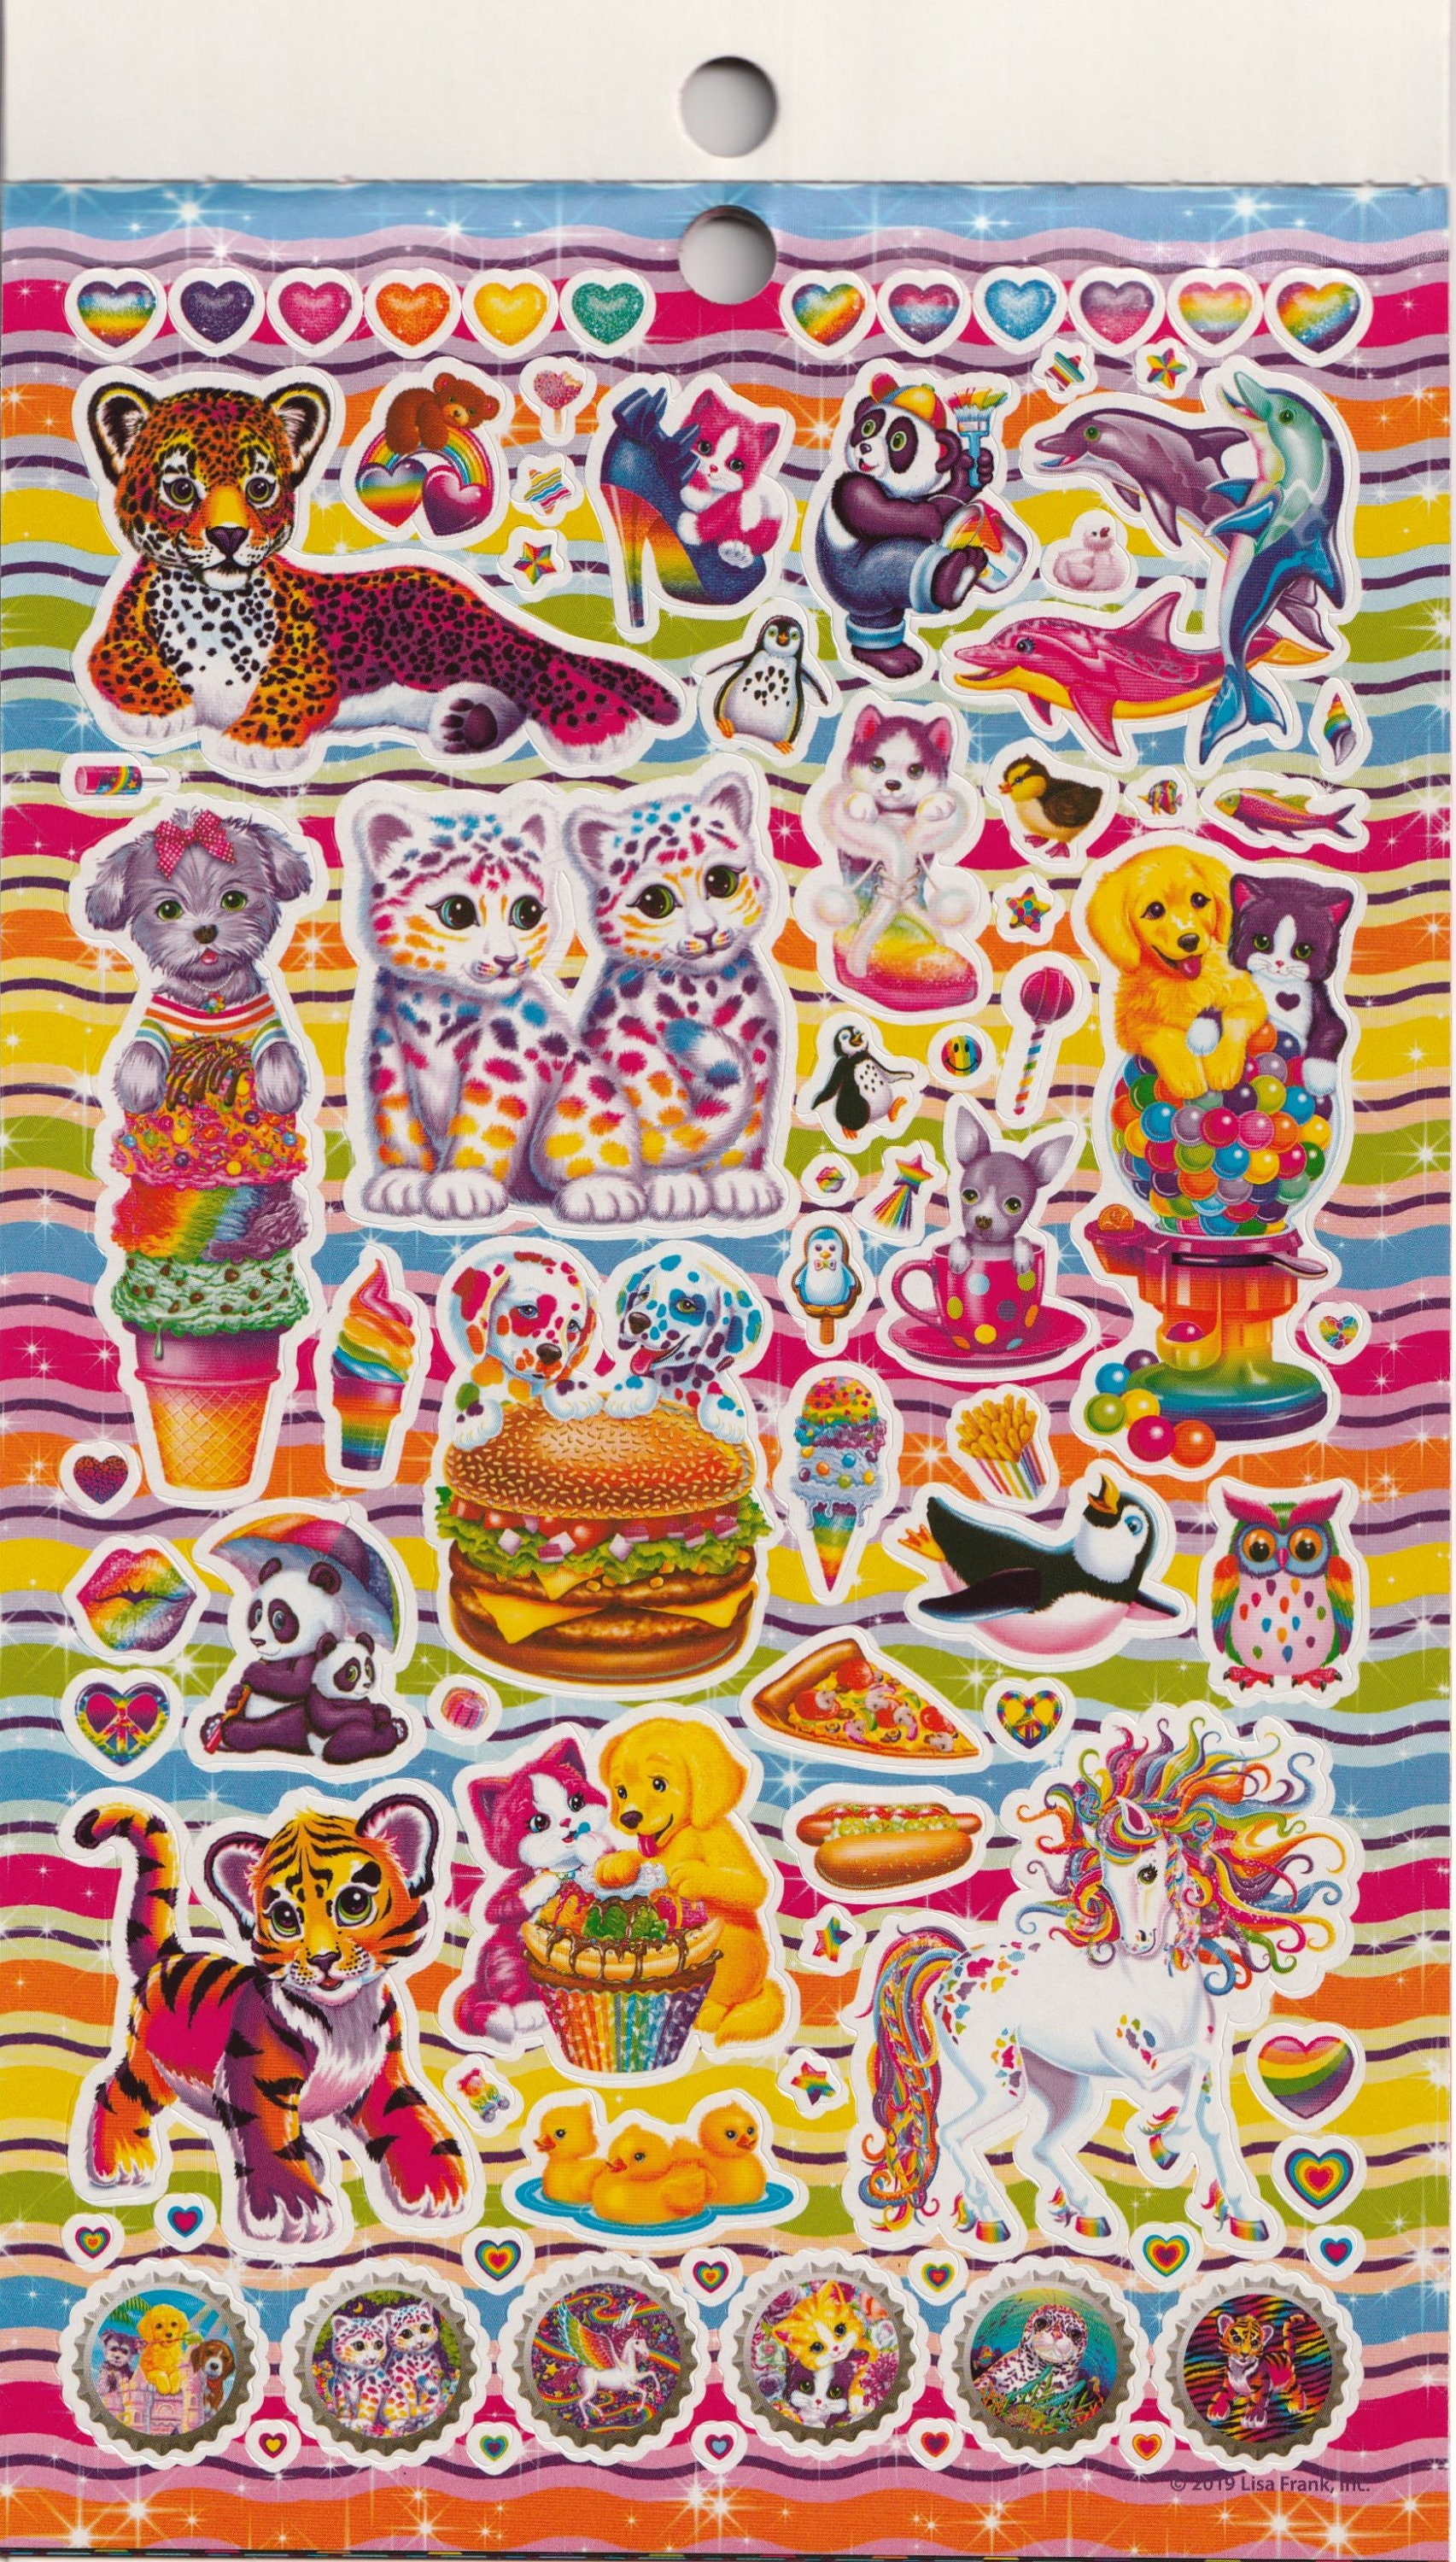 Lisa Frank Coloring and Activity Book with Over 600 Lisa Frank Stickers